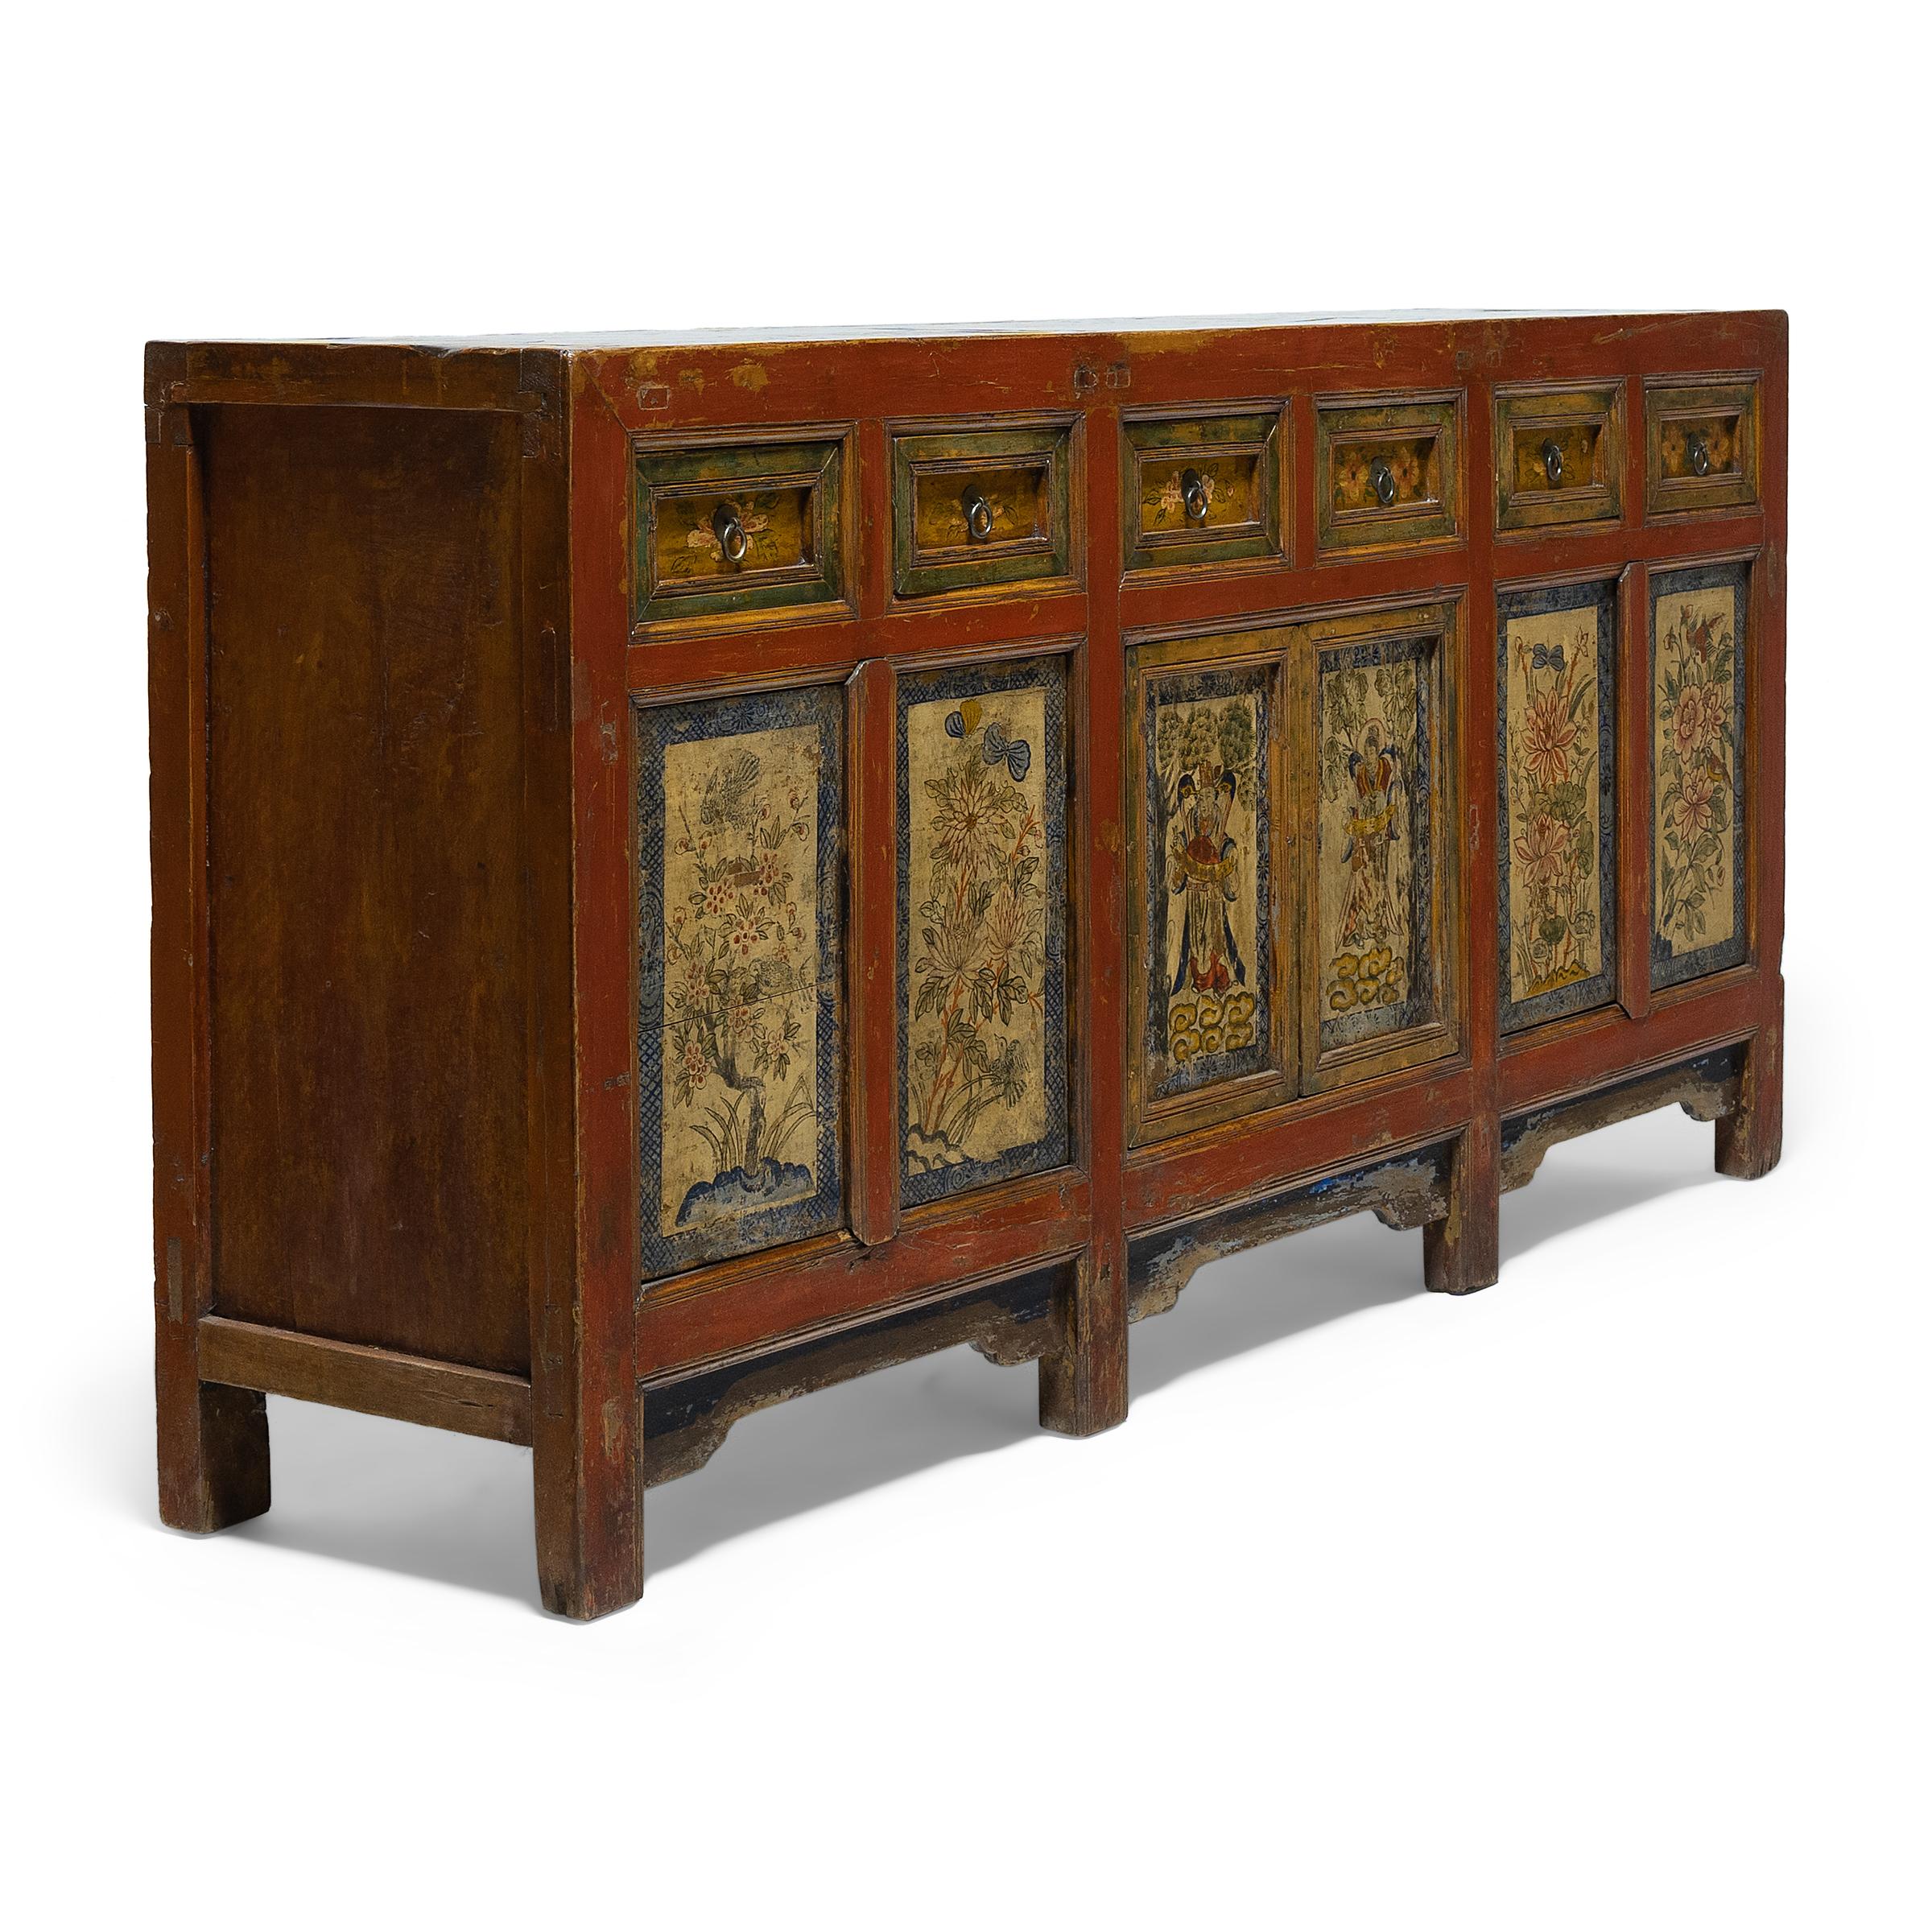 Qing Chinese Provincial Four Seasons Coffer, c. 1900